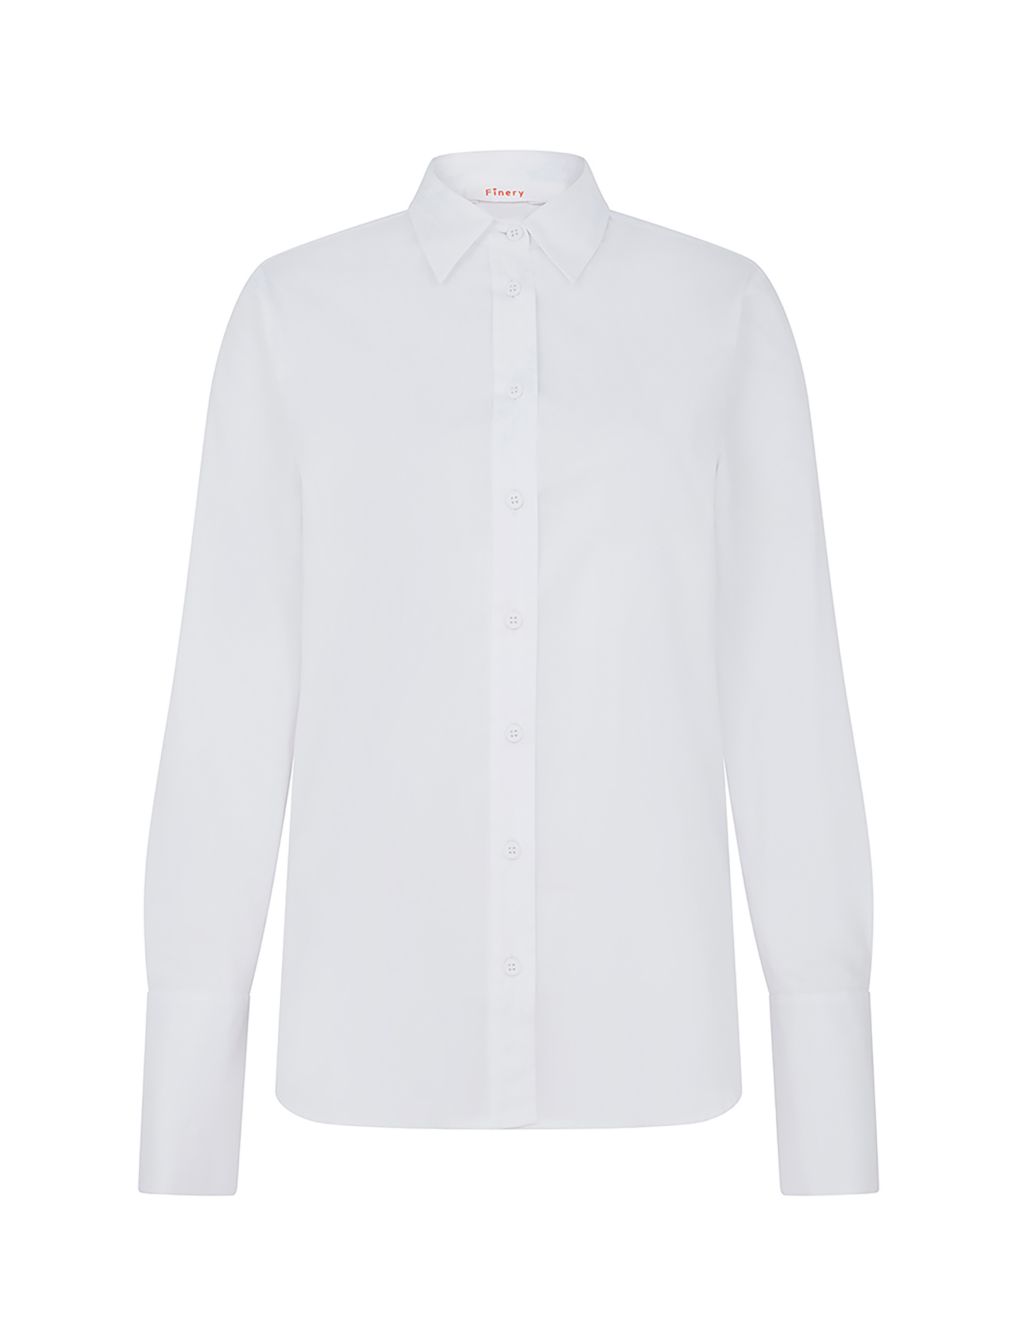 Cotton Rich Collared Shirt image 2